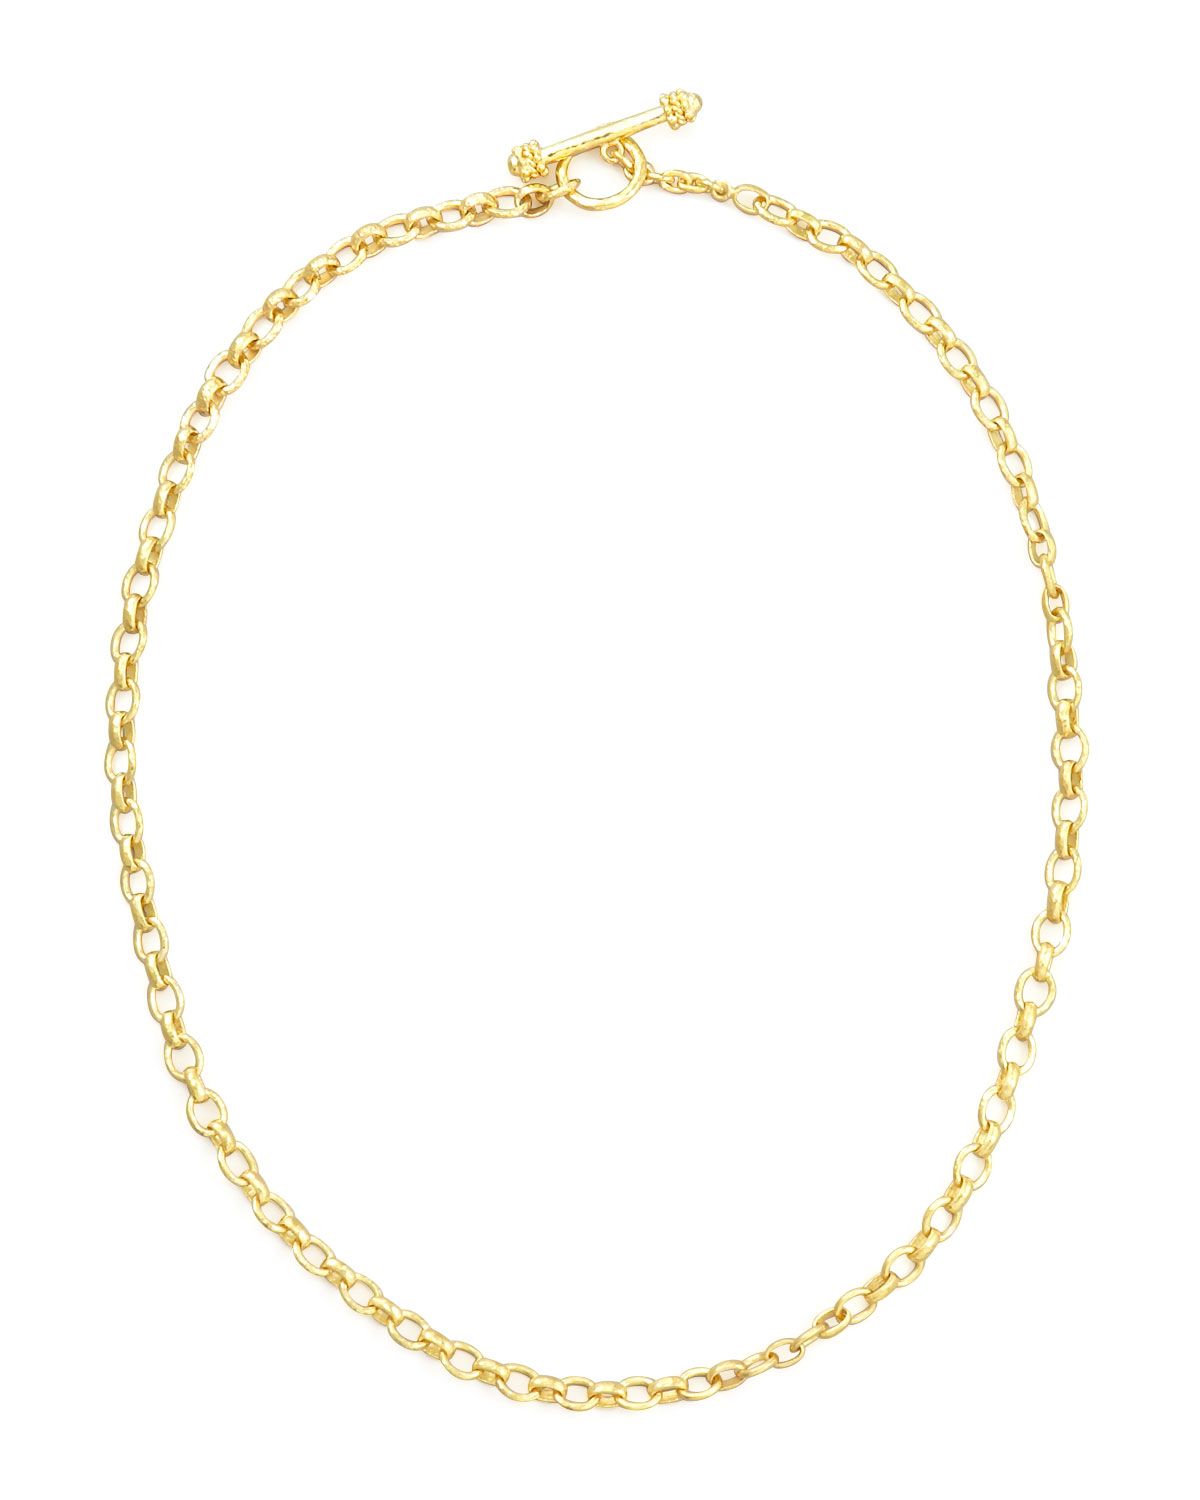 Cortina 19k Gold Link Necklace, 17"L